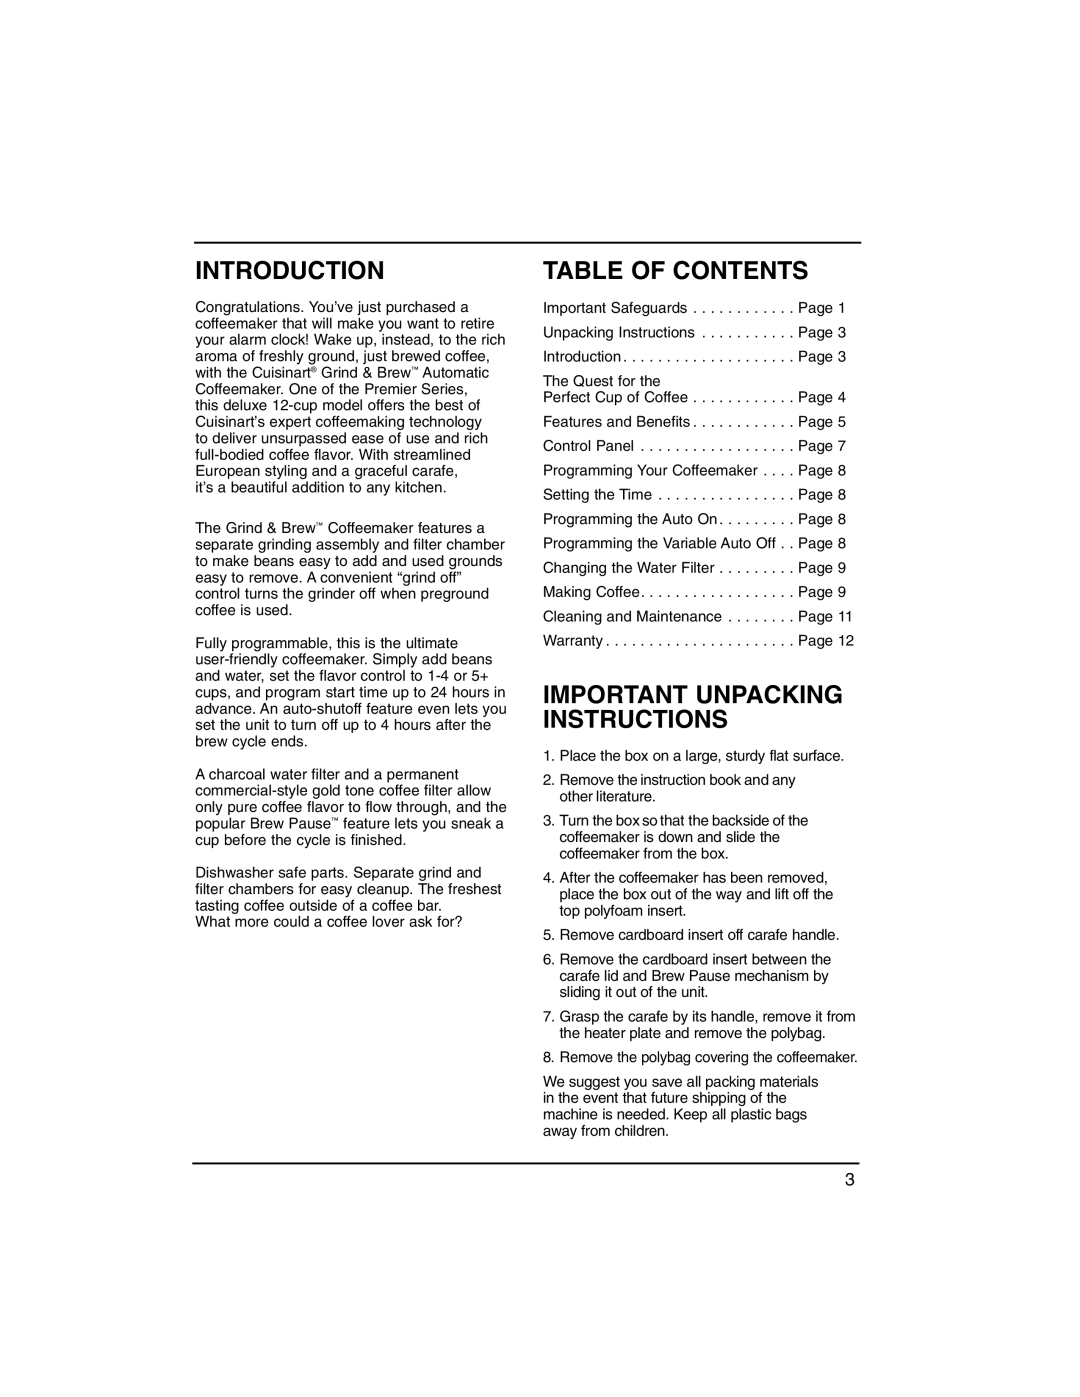 Cuisinart dgb500 manual Introduction, Table Of Contents, Important Unpacking Instructions 